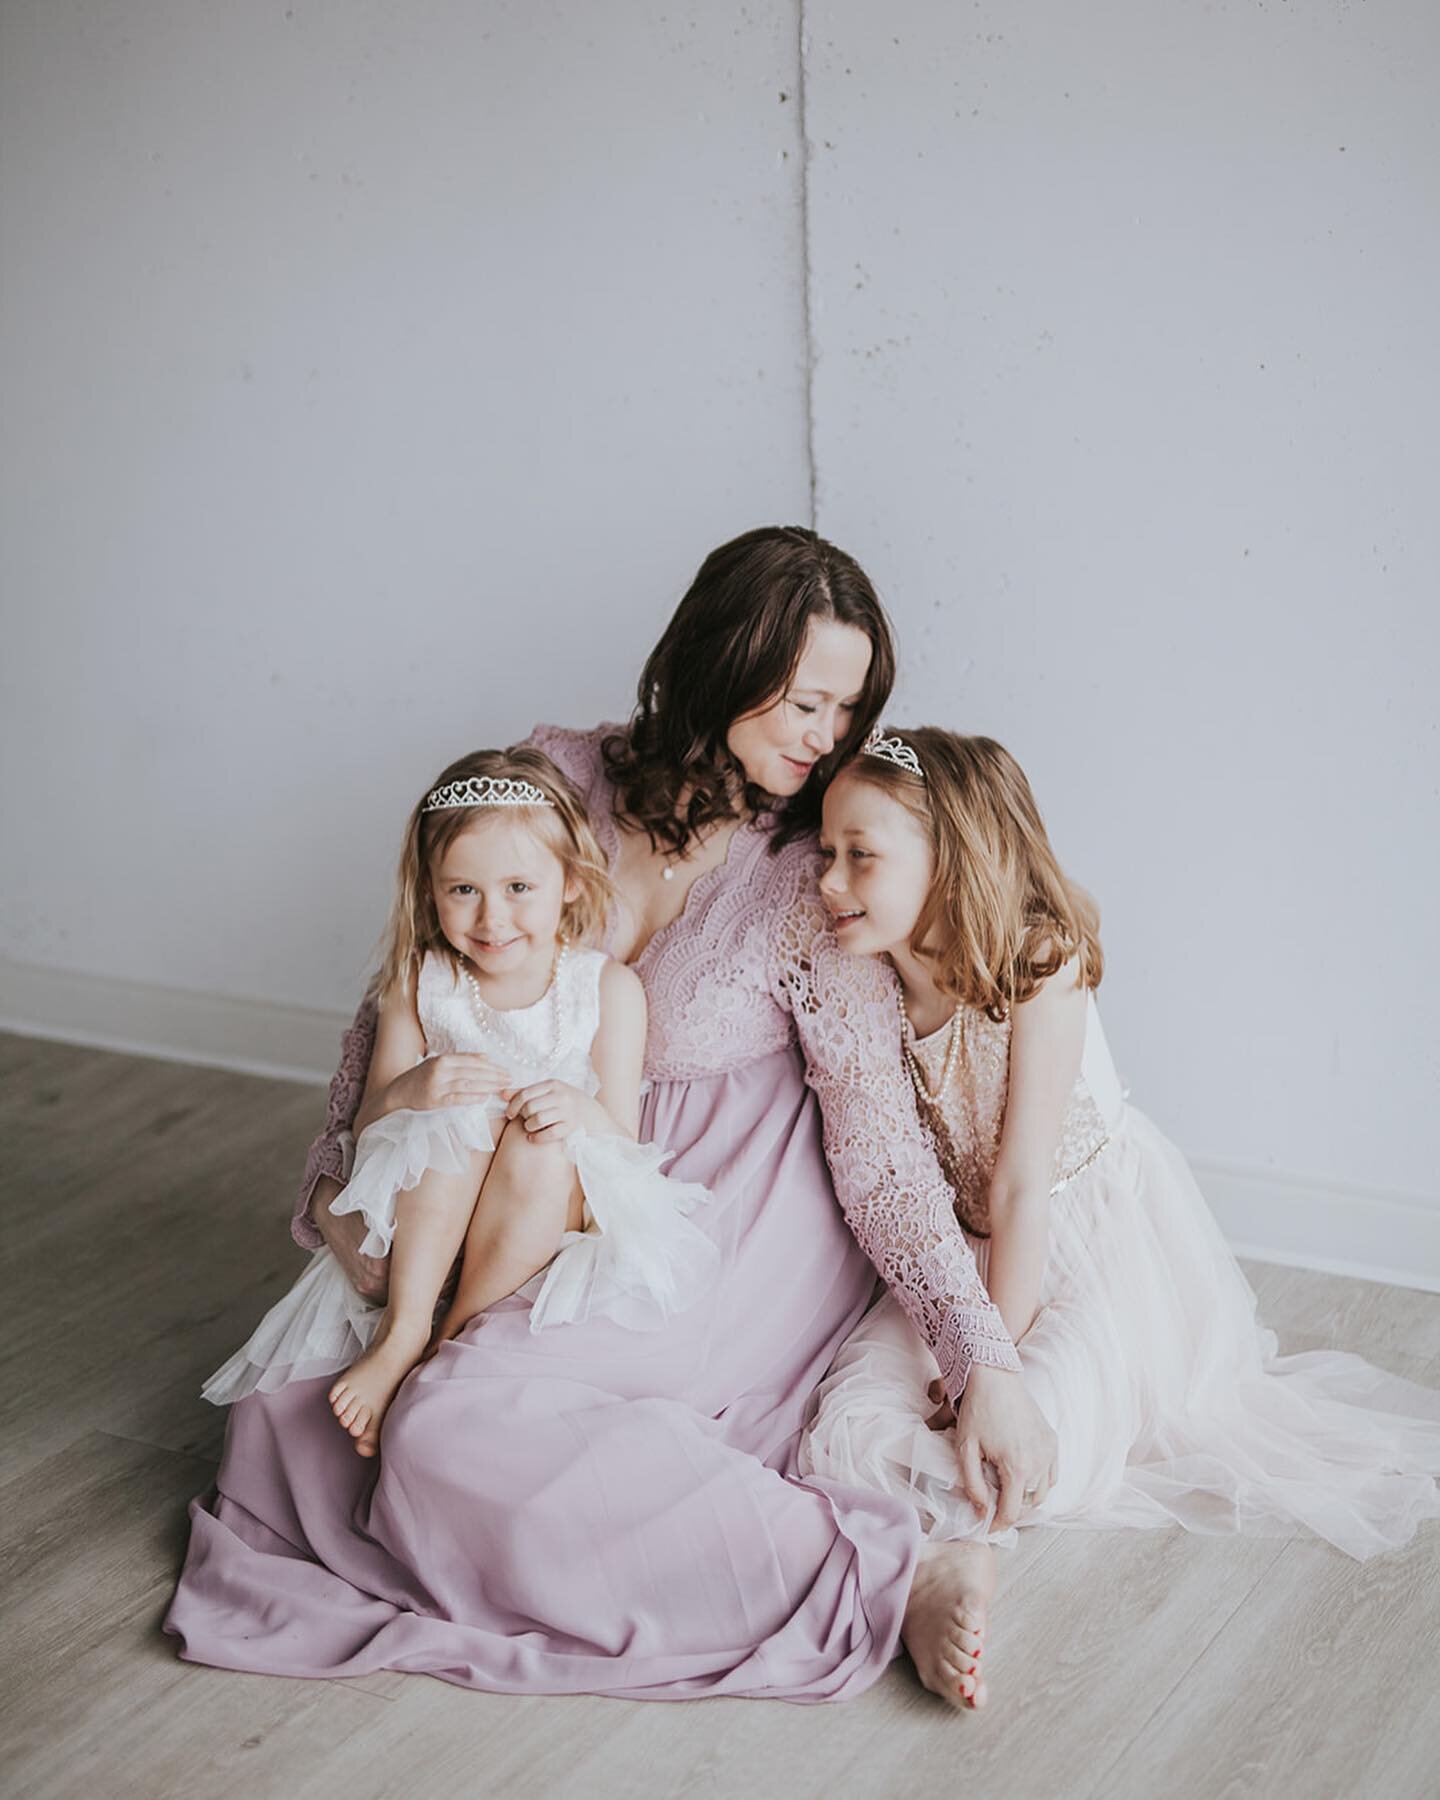 This momma and her little princesses were absolutely stunning for our Mommy and Me studio session a few weeks ago. Thanks @saskatoonstudiorental for such a great space! 
.
.
.
.
.
.
.
#yxephotographer #skphotographer #springphotos #mommyandme #studio